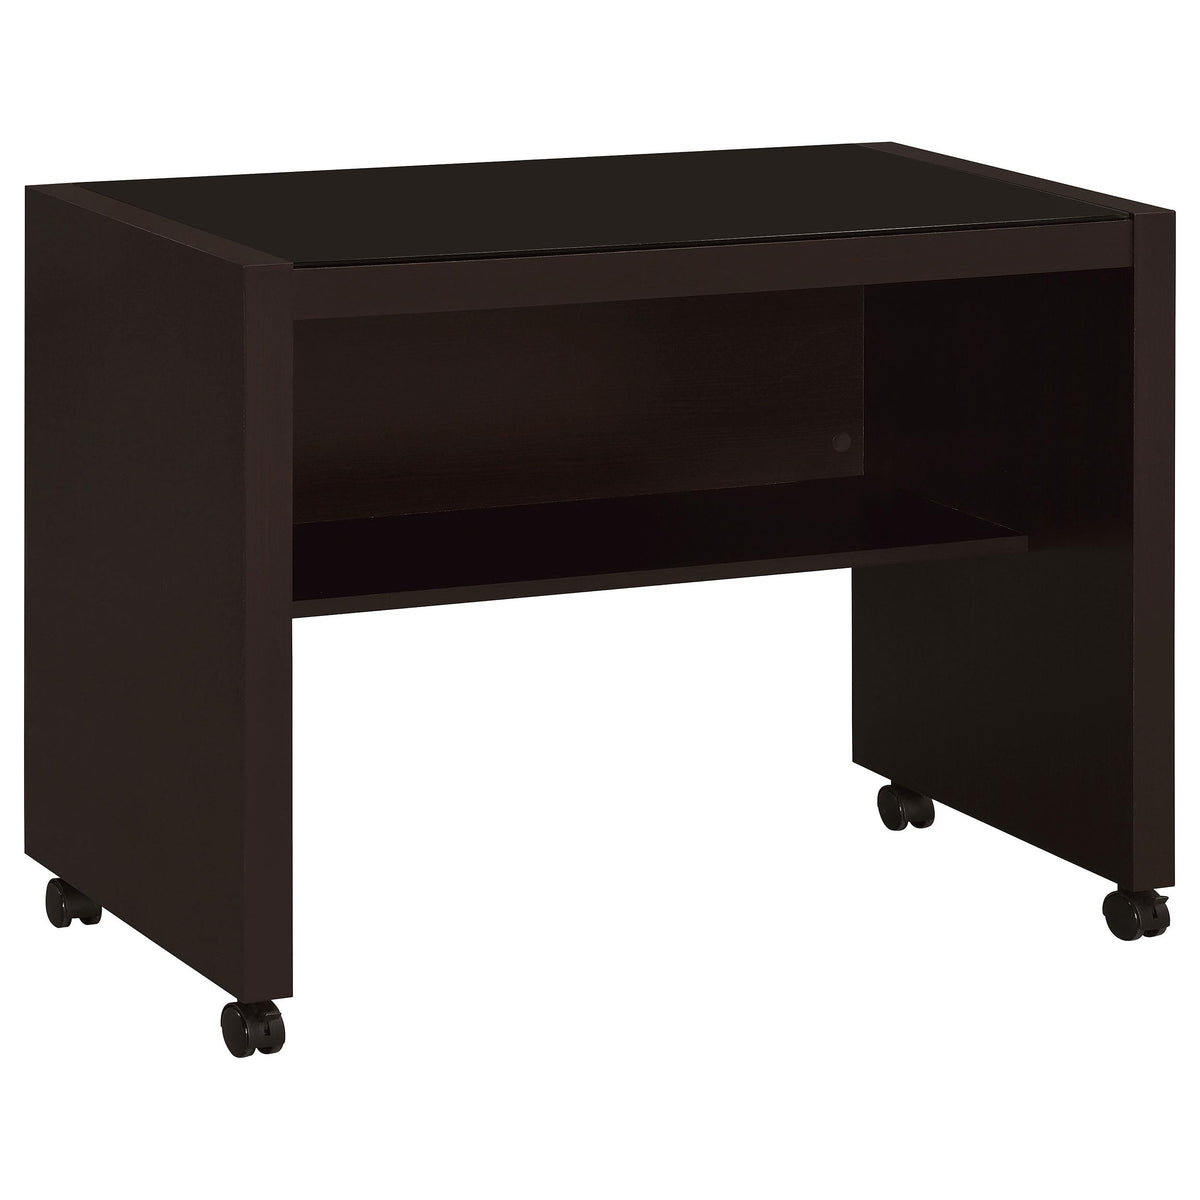 Skeena Mobile Return with Casters Cappuccino Skeena Mobile Return with Casters Cappuccino Half Price Furniture